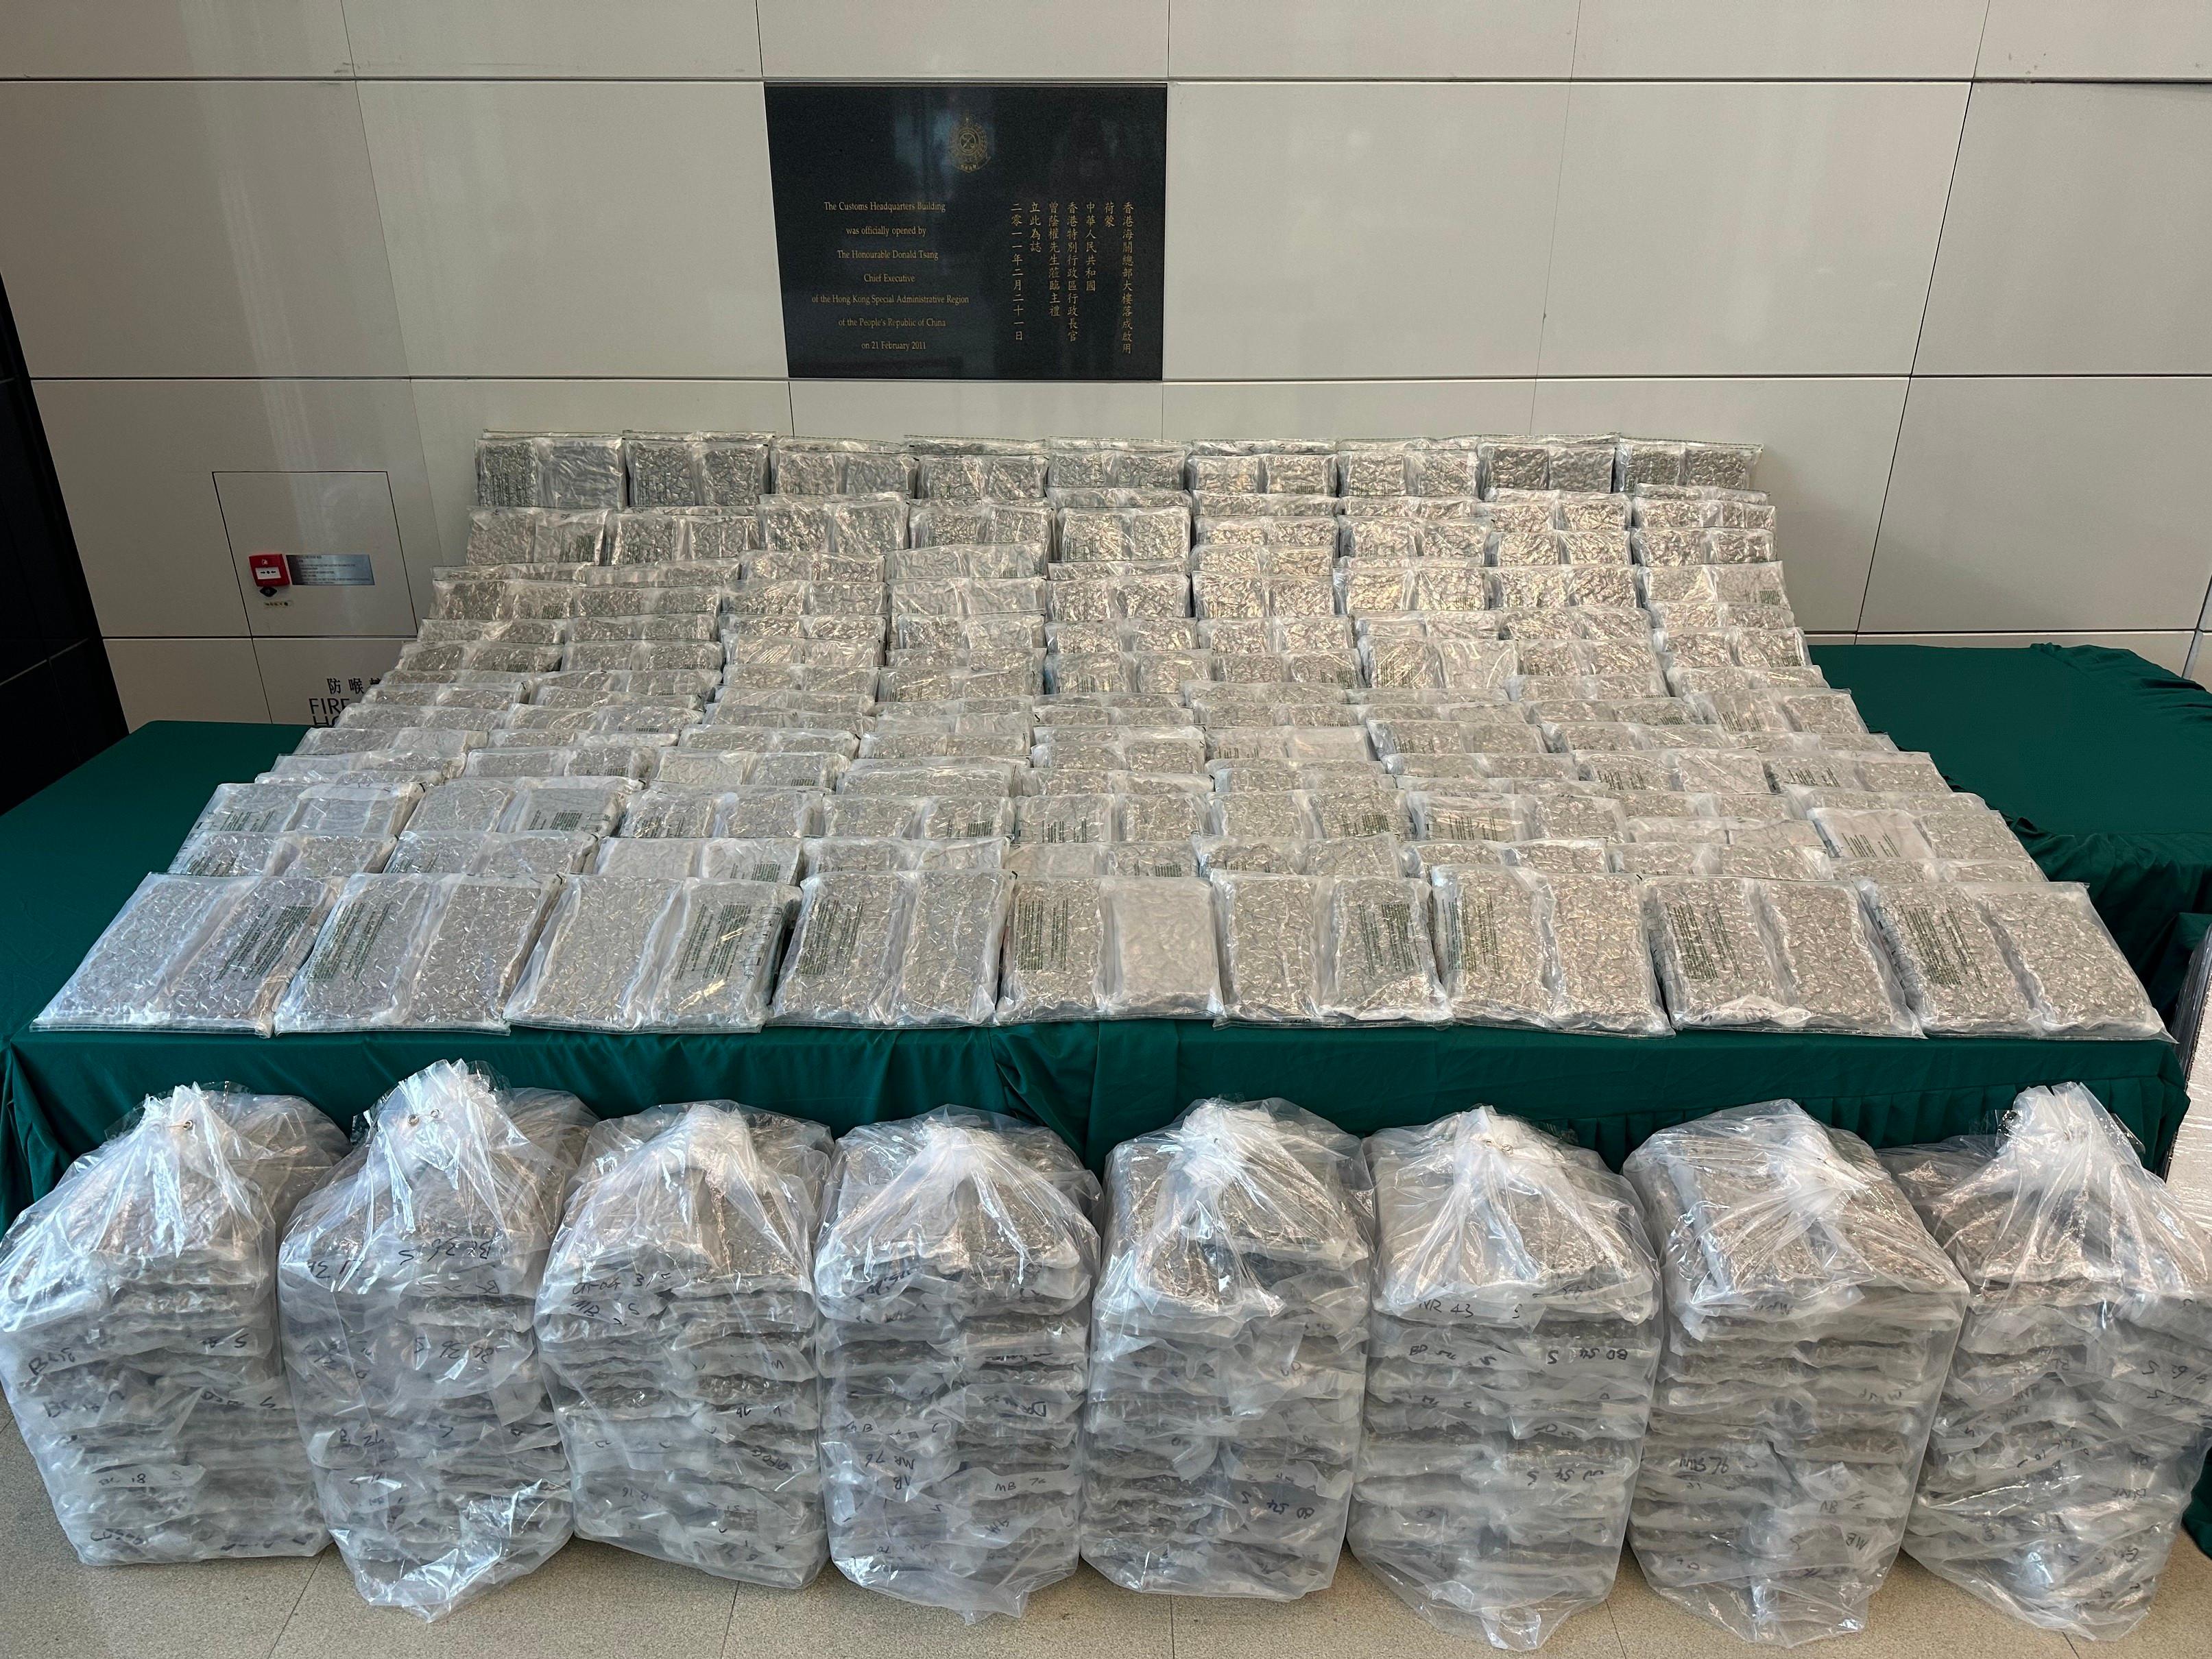 Hong Kong Customs seized about 348 kilograms of suspected cannabis buds with an estimated market value of about $60 million at Kwai Chung Customhouse Cargo Examination Compound on December 9. Photo shows the suspected cannabis buds seized by Customs officers.